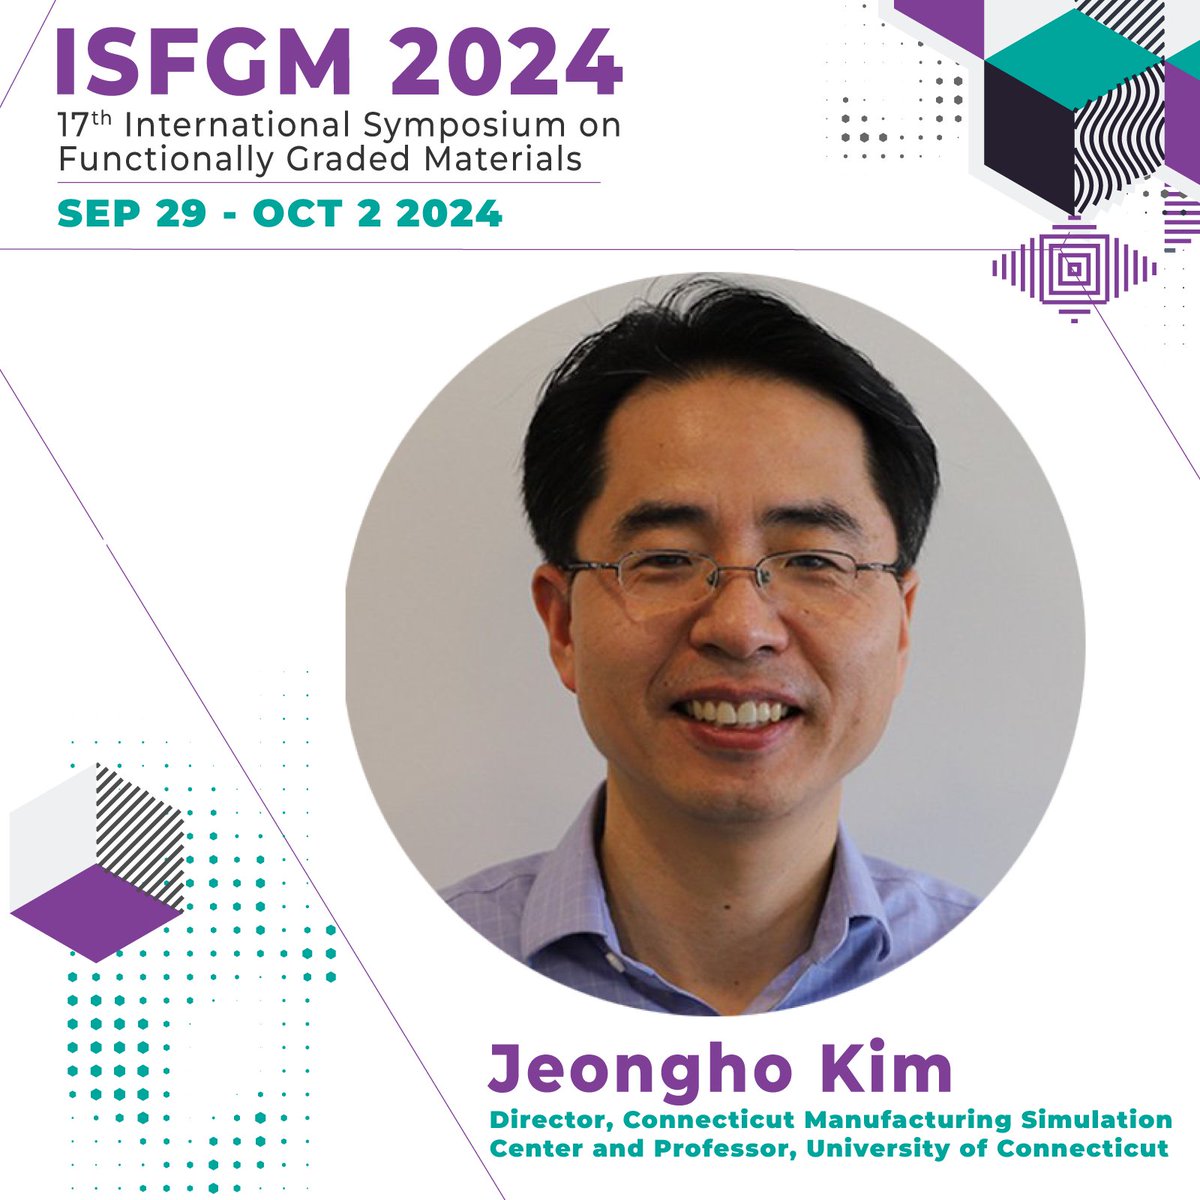 📢Excitement is building as we unveil our stellar lineup of plenary speakers for the upcoming 2024 Functionally #GradedMaterials (#FGMs) #Conference!

+ Professor Jeongho Kim, @UConn

📢Submit your abstract today: events.inl.int/isfgm2024

#inlnano #abstractsubmission